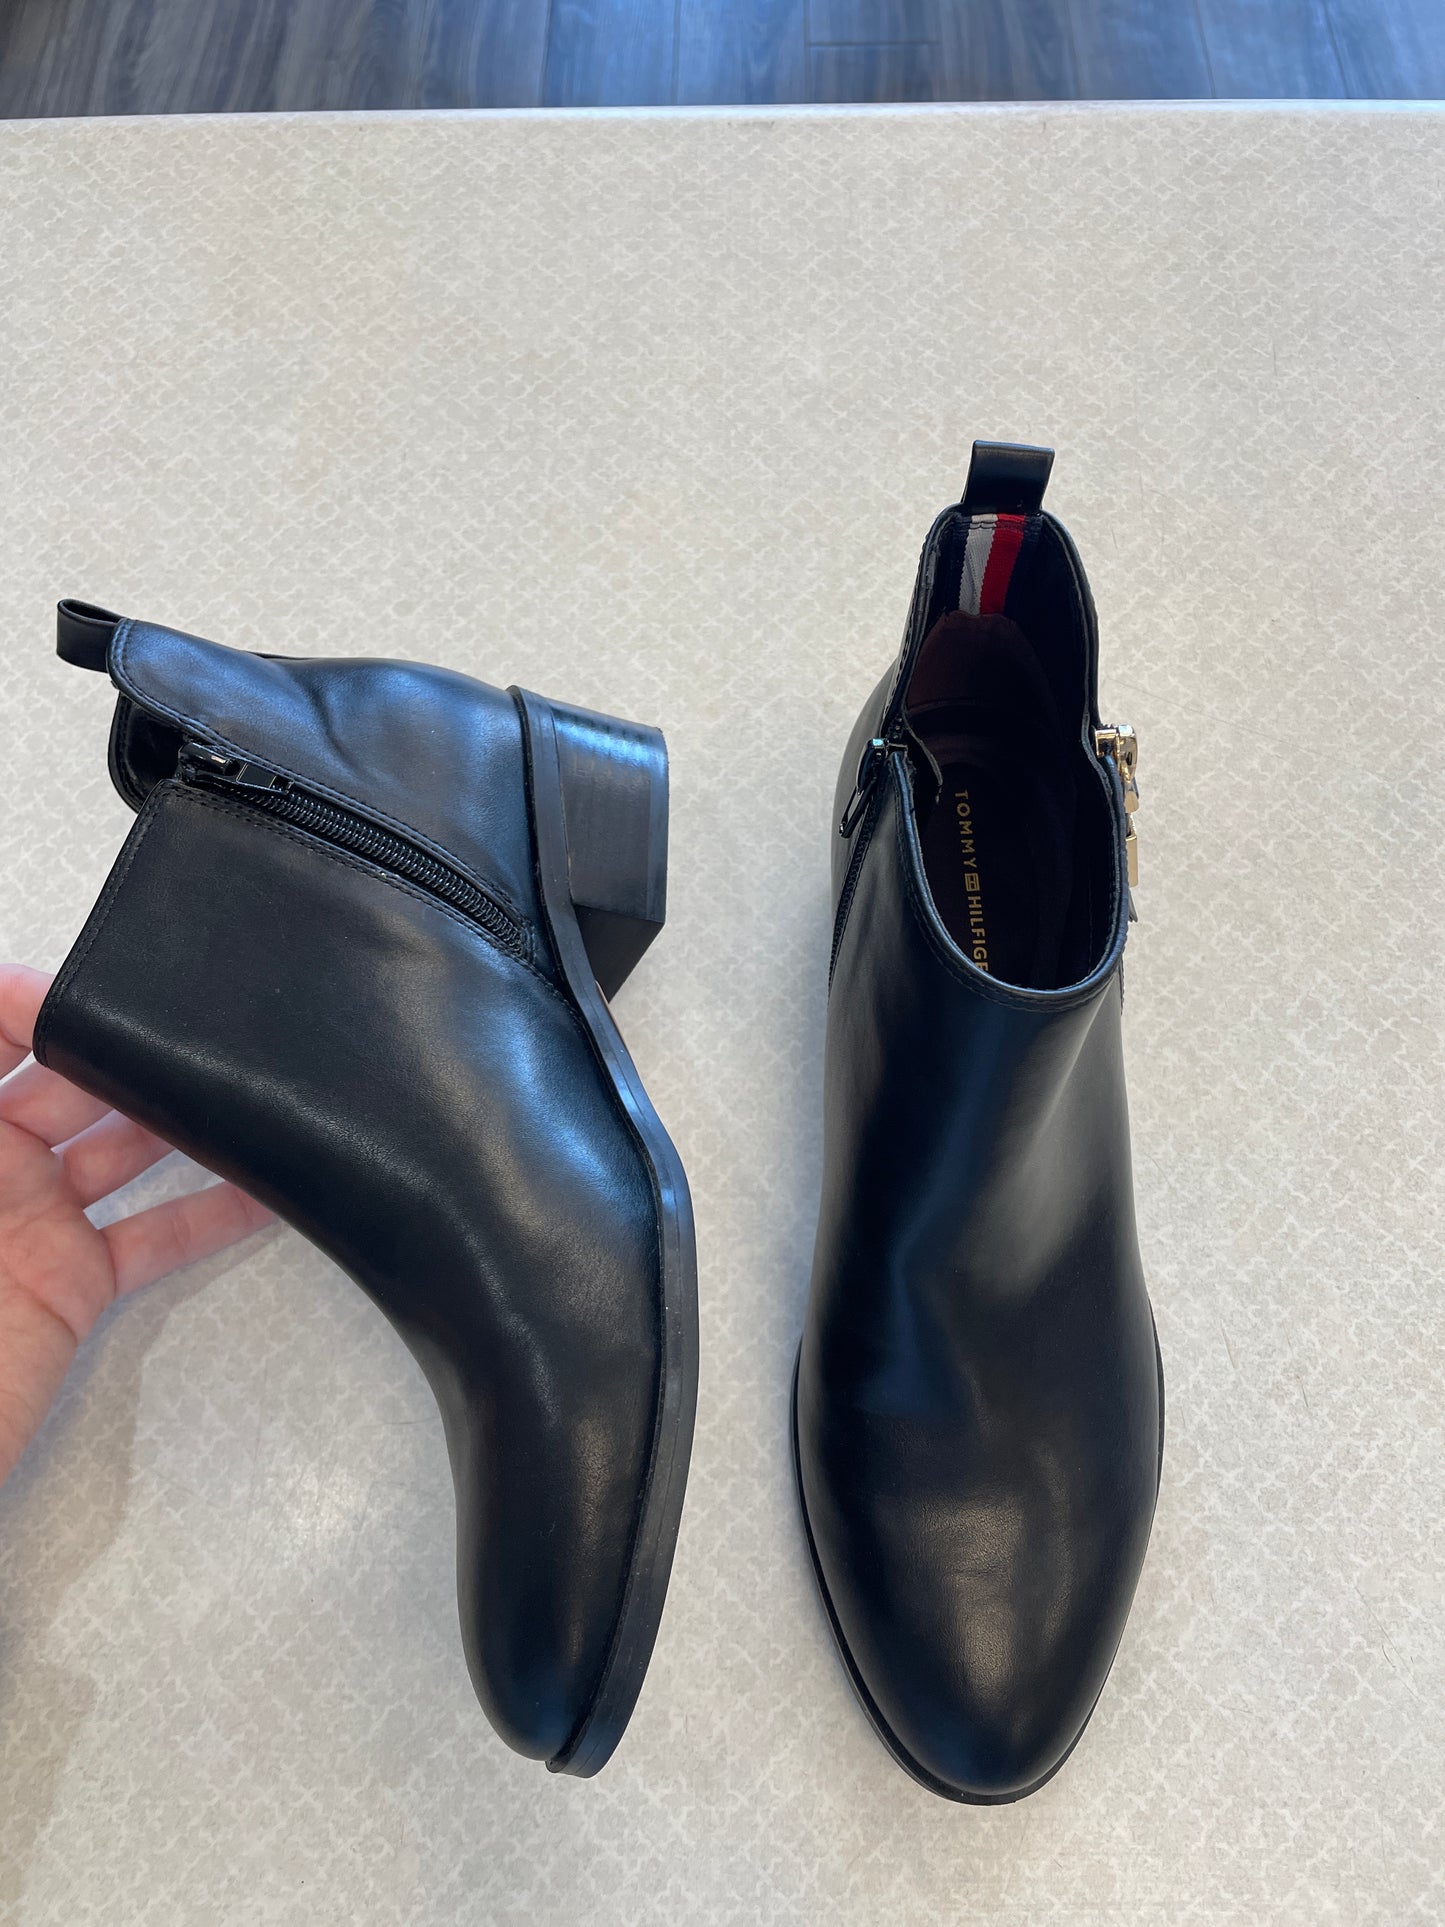 Boots Ankle Heels By Tommy Hilfiger  Size: 7